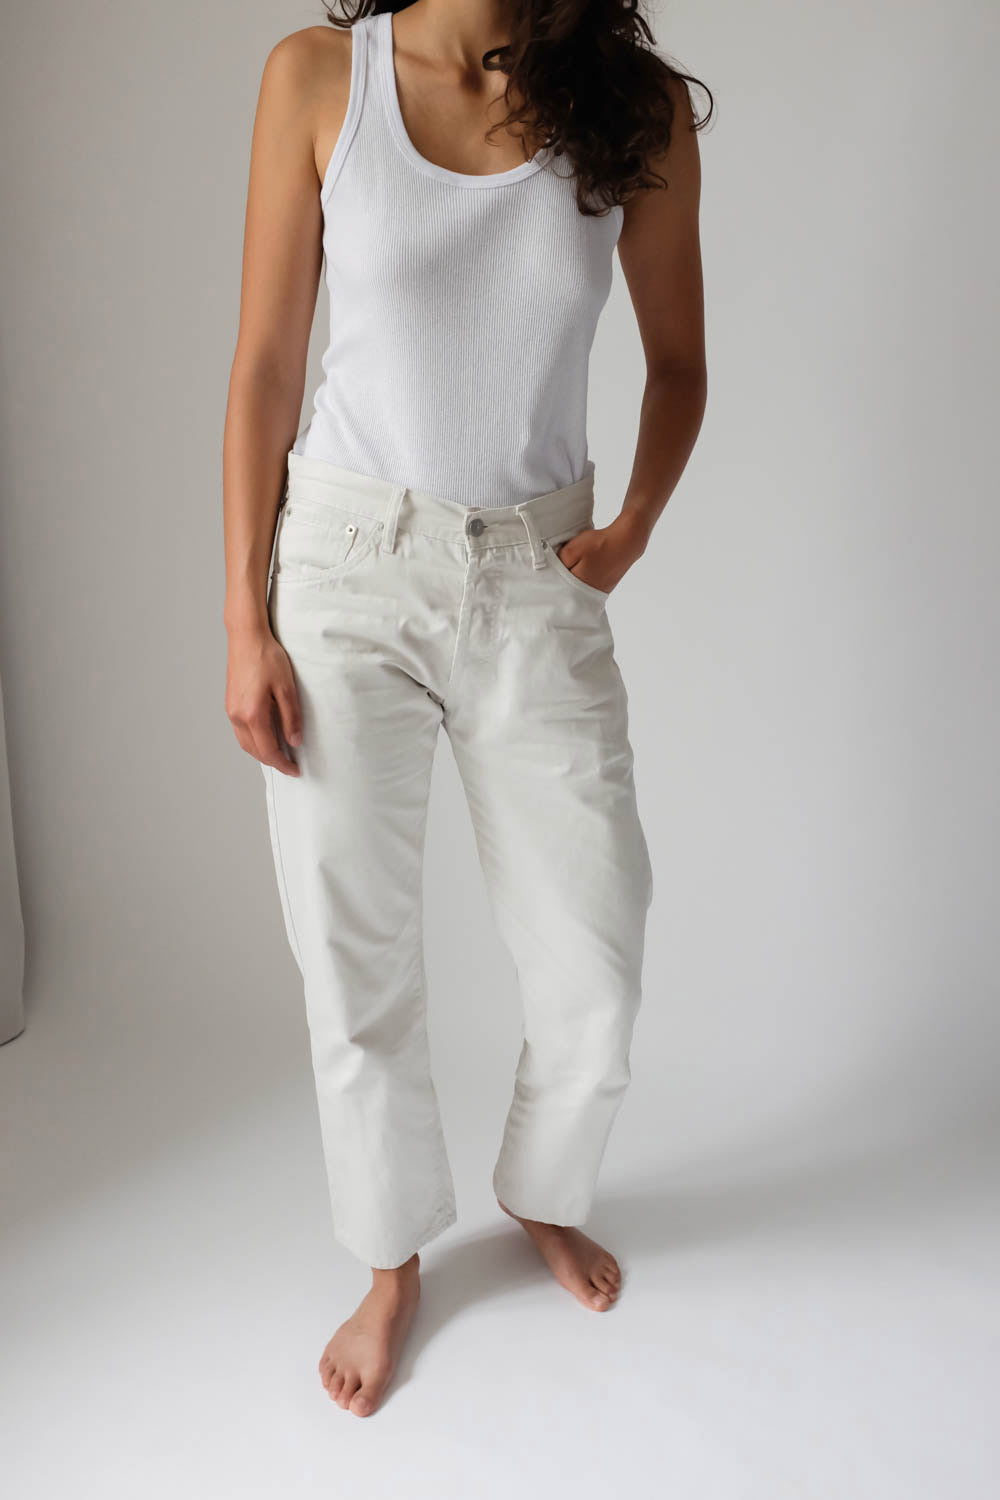 0034_LEVIS OFF WHITE JEANS